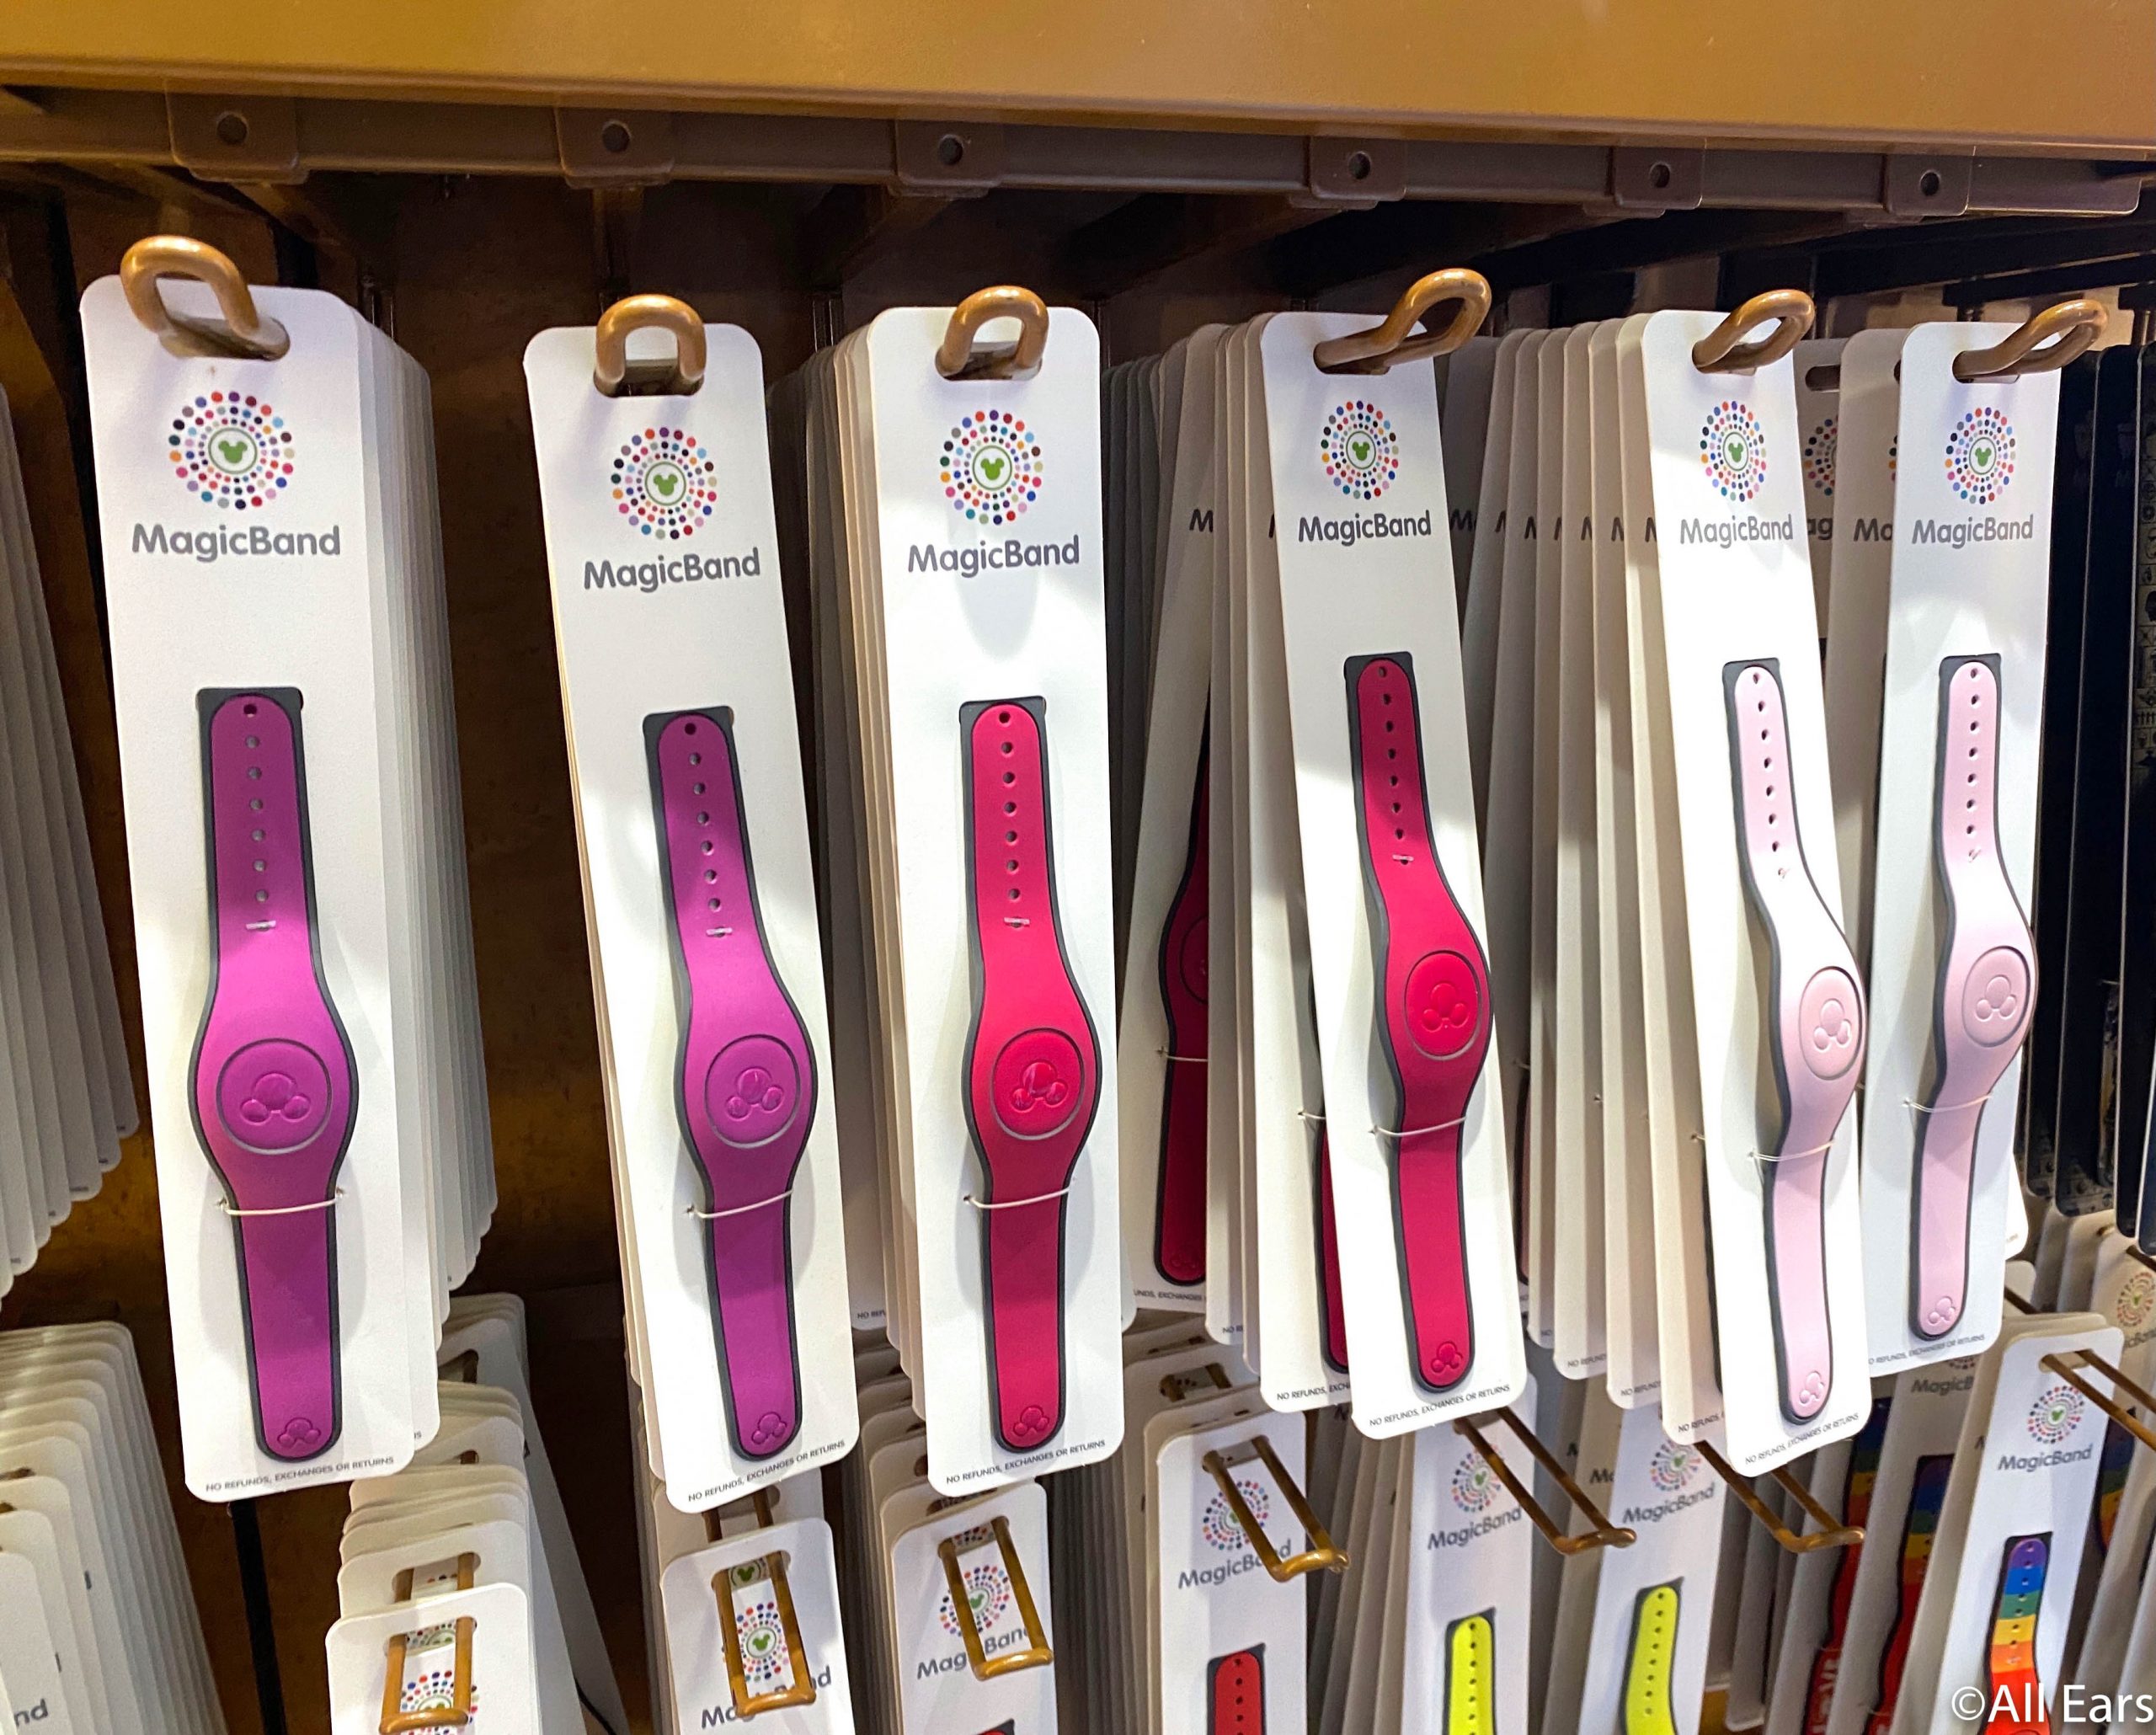 https://allears.net/wp-content/uploads/2021/05/2021-reopening-wdw-magicband-price-increase-scaled.jpg